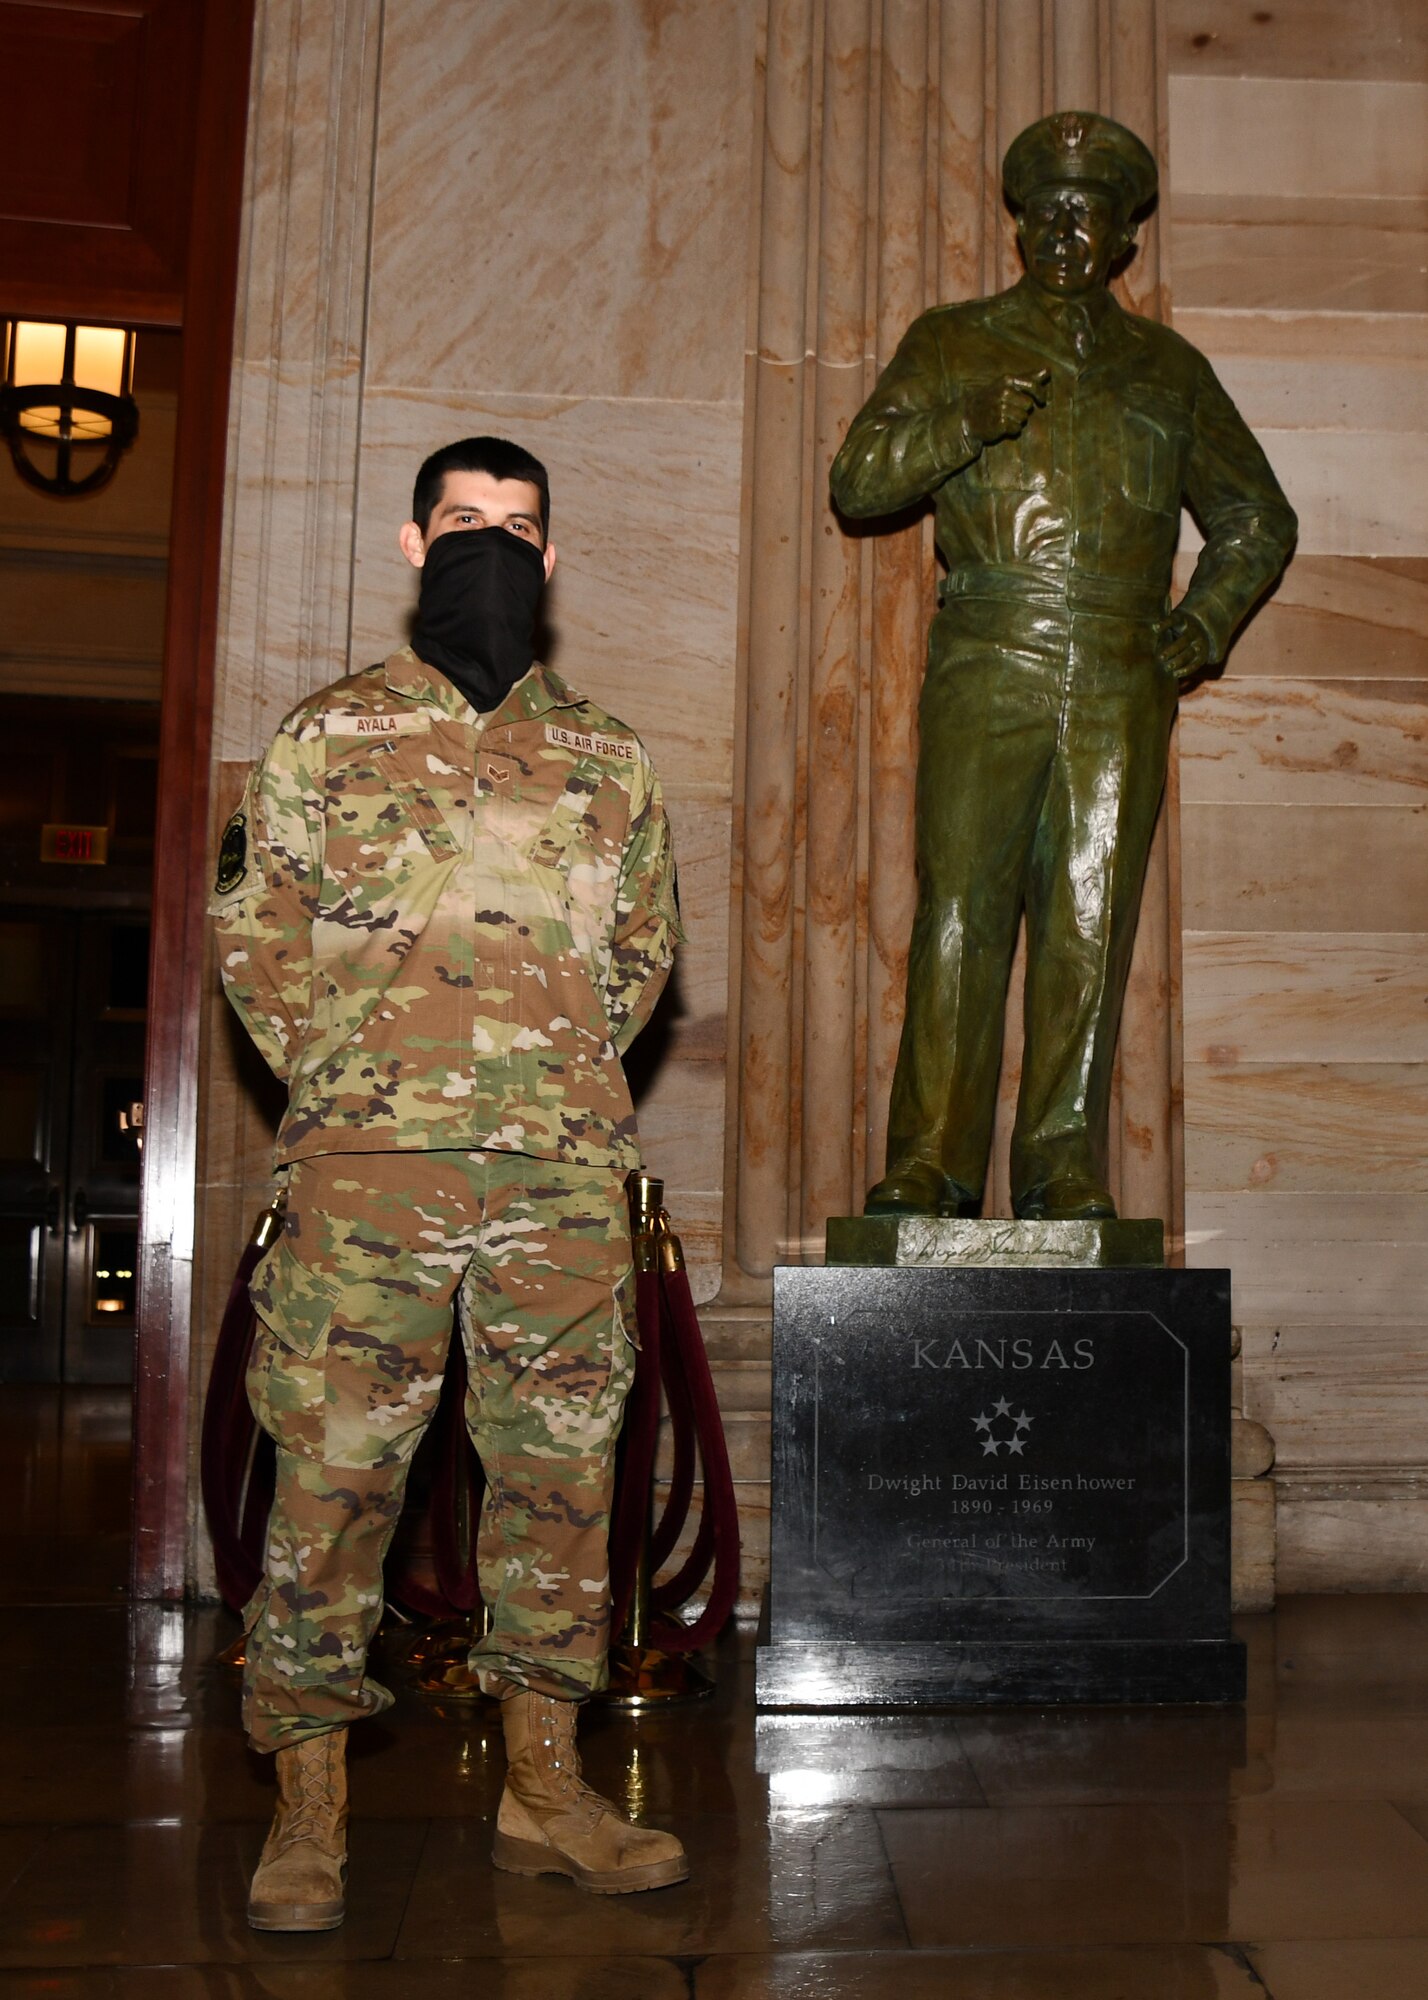 U.S. Air Force Senior Airman Dorian Ayala, an avionics test station technician with the 104th Fighter Wing Maintenance Squadron, poses for a photo in front of the Dwight D. Eisenhower statue in the United States Capitol building in Washington, D.C., May 13, 2021. The National Guard has been requested to continue supporting federal law enforcement agencies with security, communications, medical evacuation, logistics and safety support to state, district and federal agencies through mid-May. (U.S. Air National Guard photo by Staff Sgt. Hanna Smith)